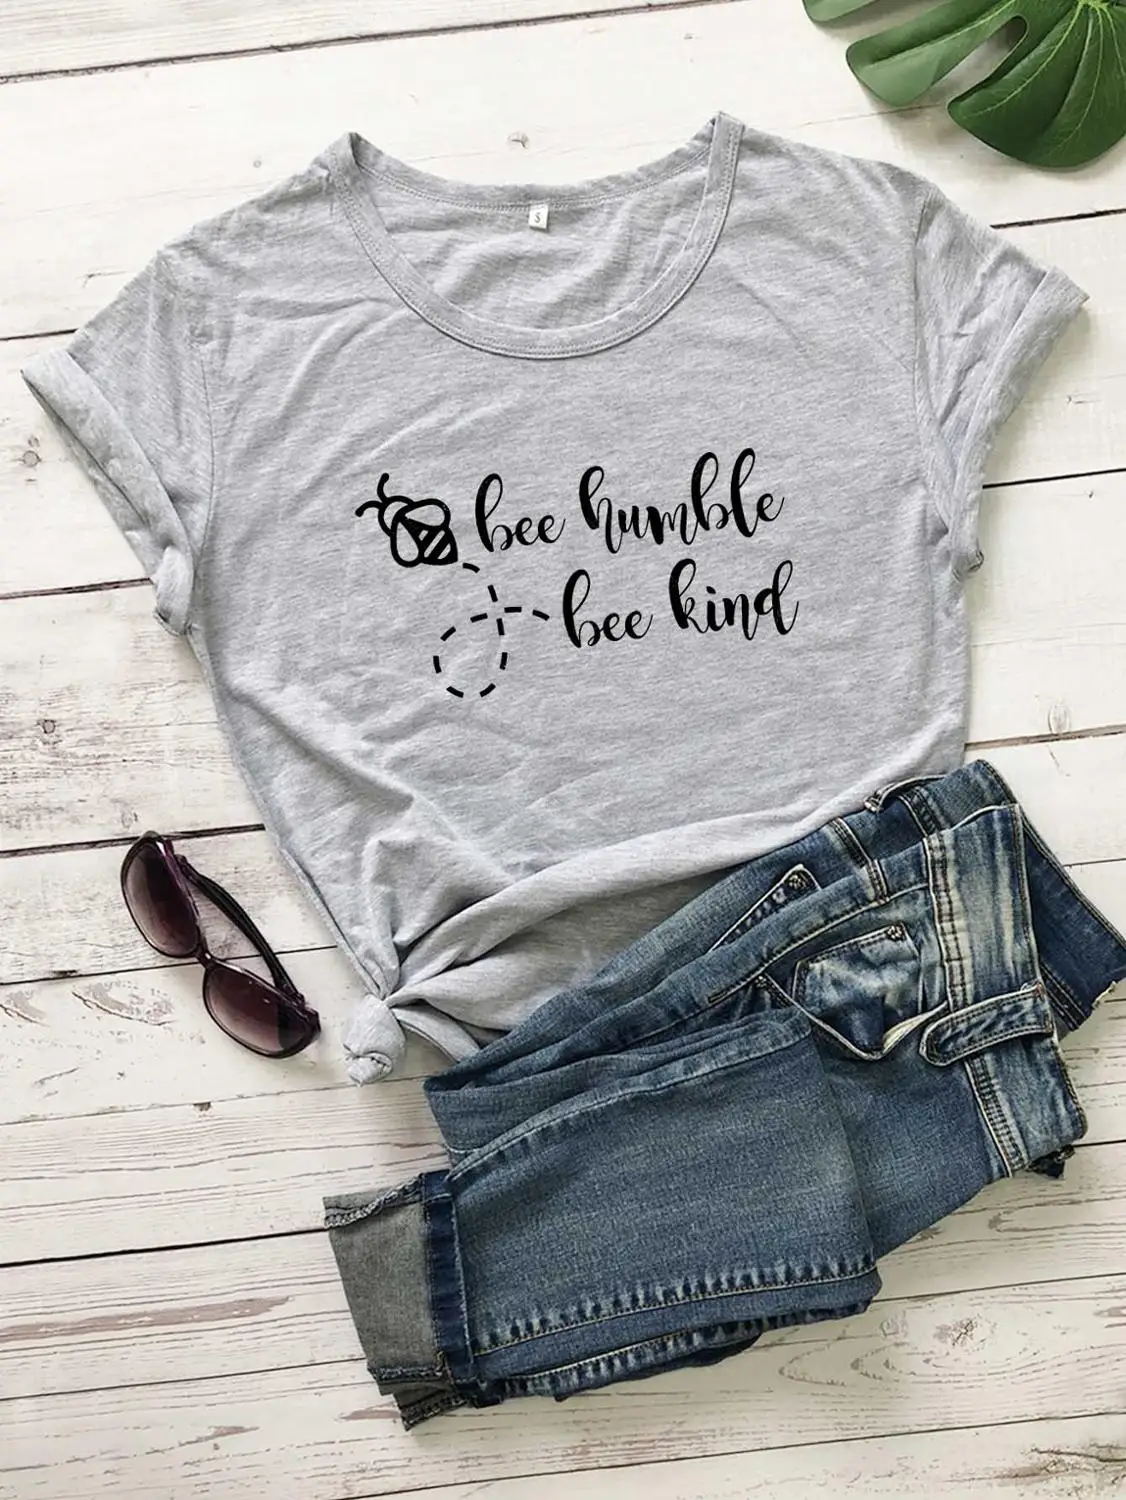 

Bee Humble Bee Kind women fashion pure cotton casual funny slogan grunge tumblr party hipster girl young hipster tees tops